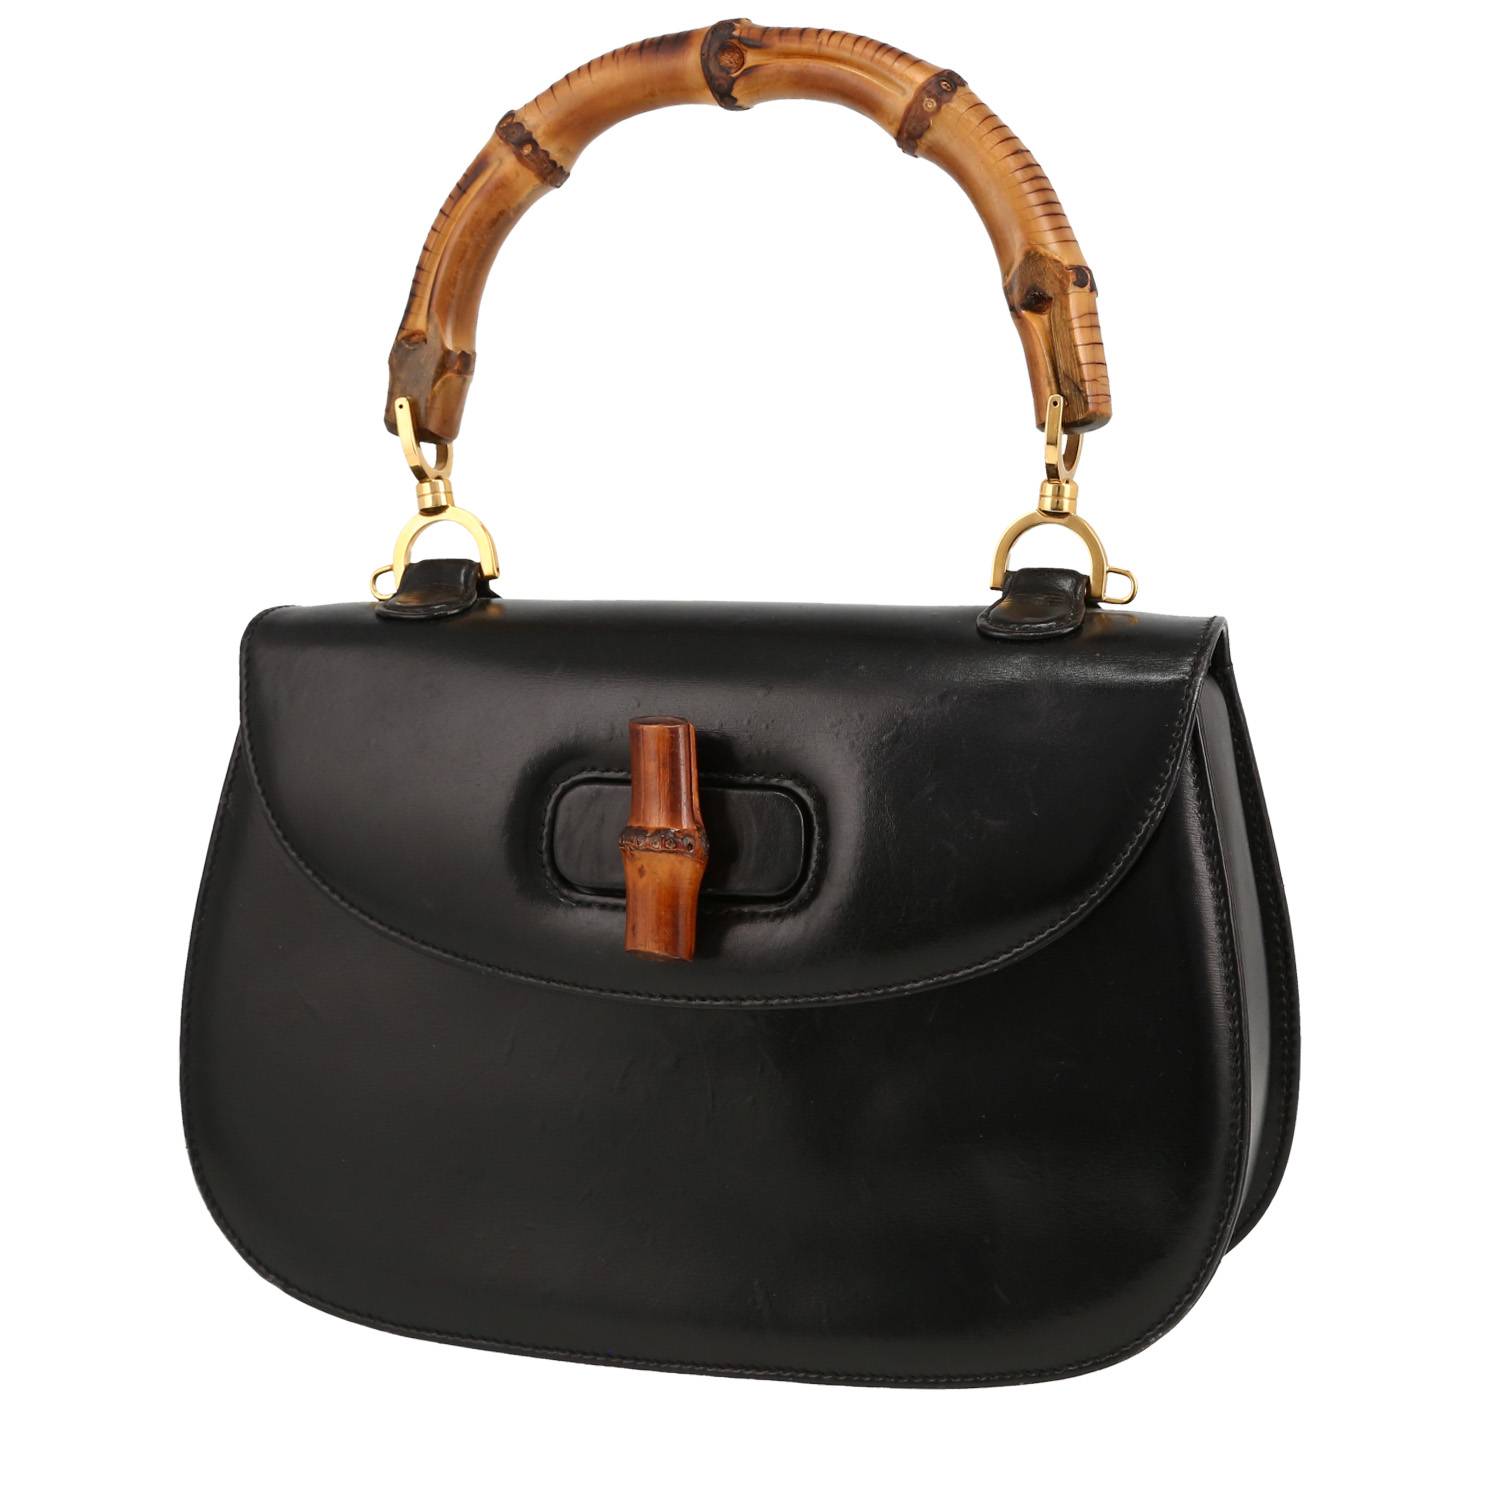 Bamboo Handbag In Black Leather And Bamboo